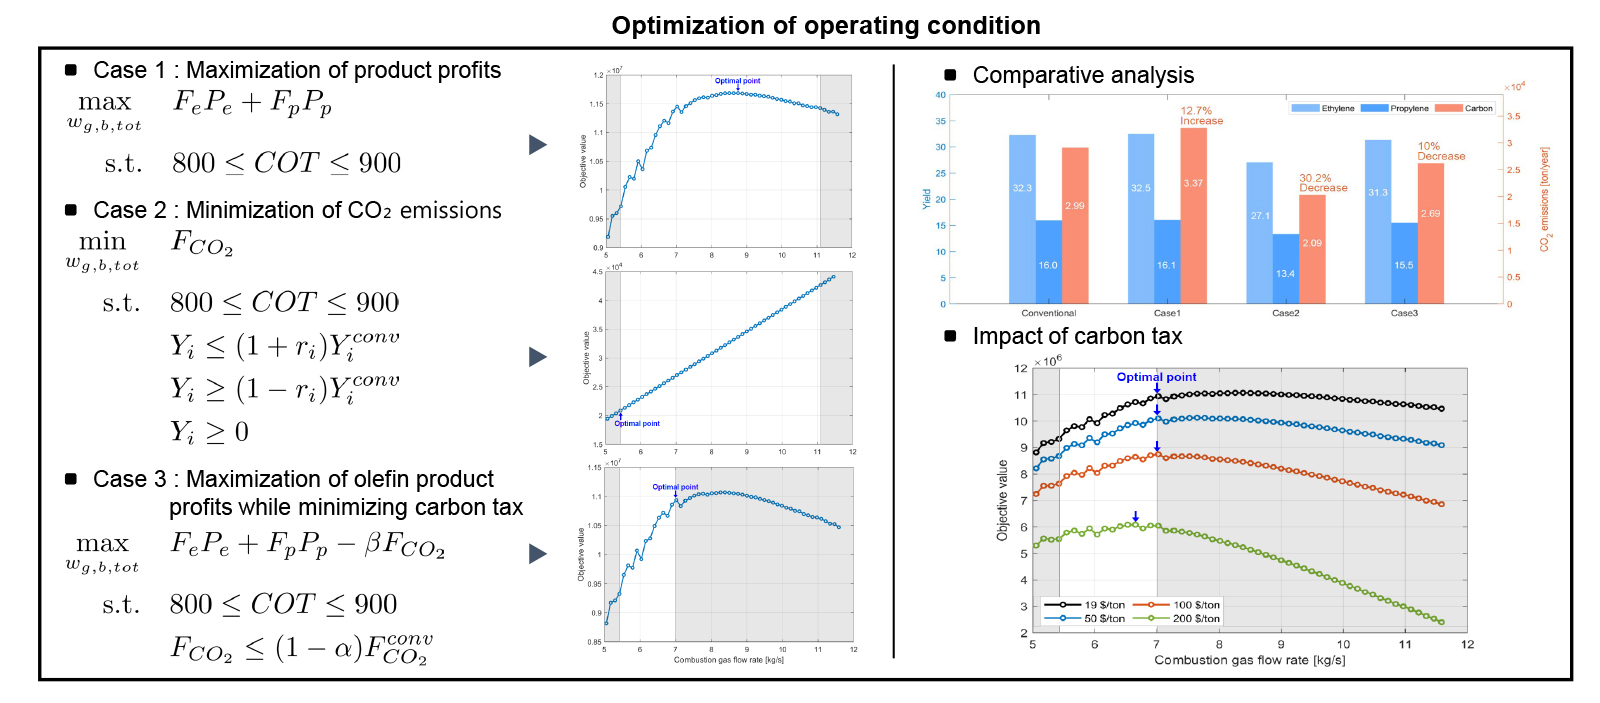 Modeling and optimization of a naphtha pyrolysis process considering carbon emissions